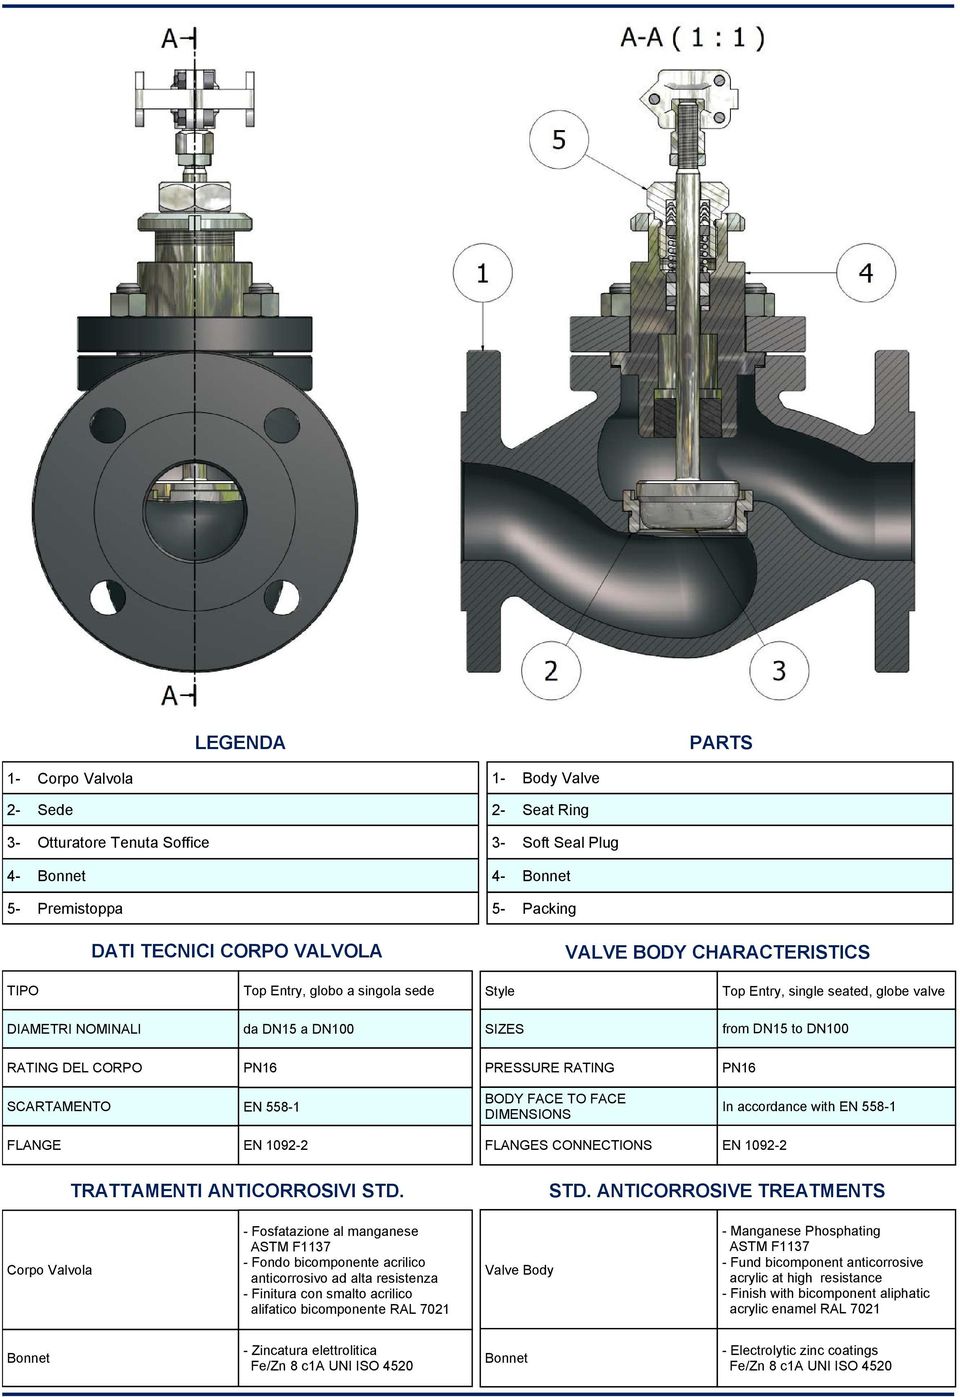 FACE TO FACE DIMENSIONS In accordance with EN 551 FLANGE EN 10922 FLANGES CONNECTIONS EN 10922 TRATTAMENTI ANTICORROSIVI STD.